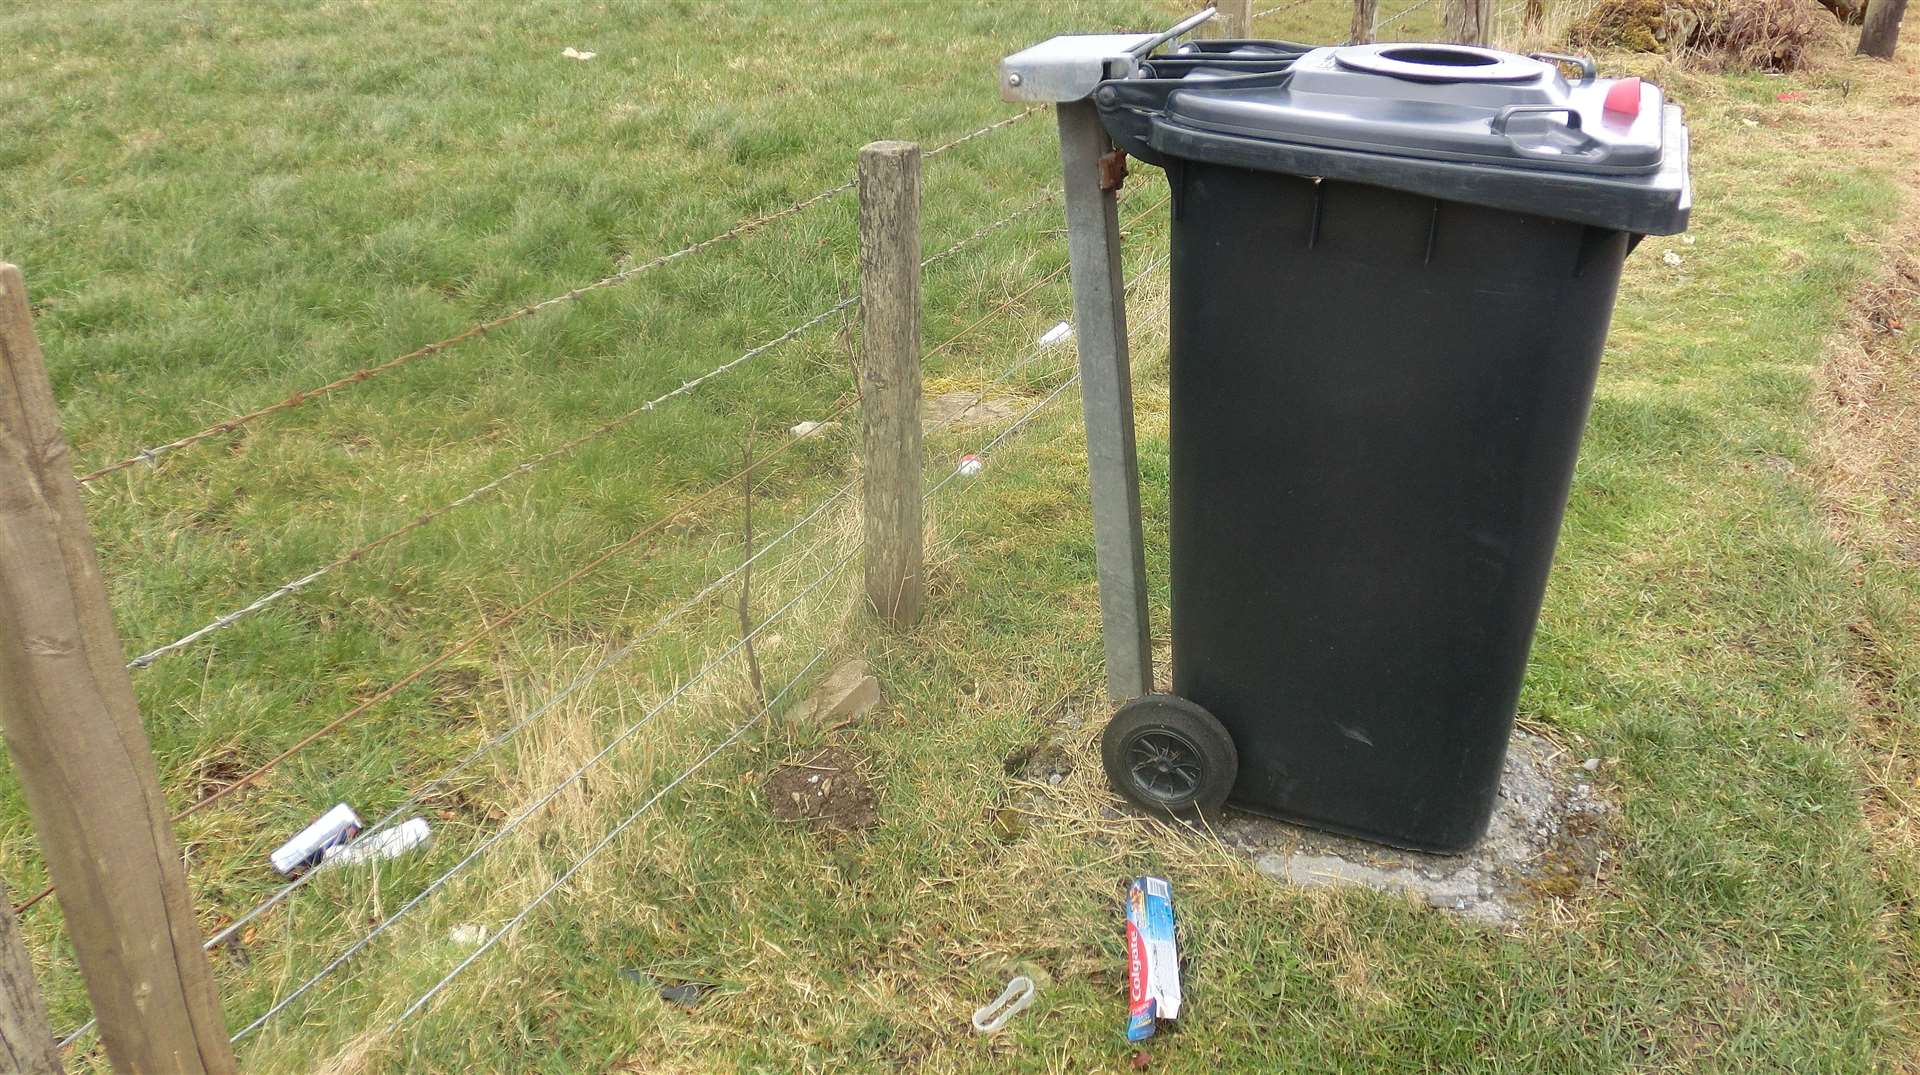 A Highland Council bin lies along the lay-by and rubbish lies next to it.